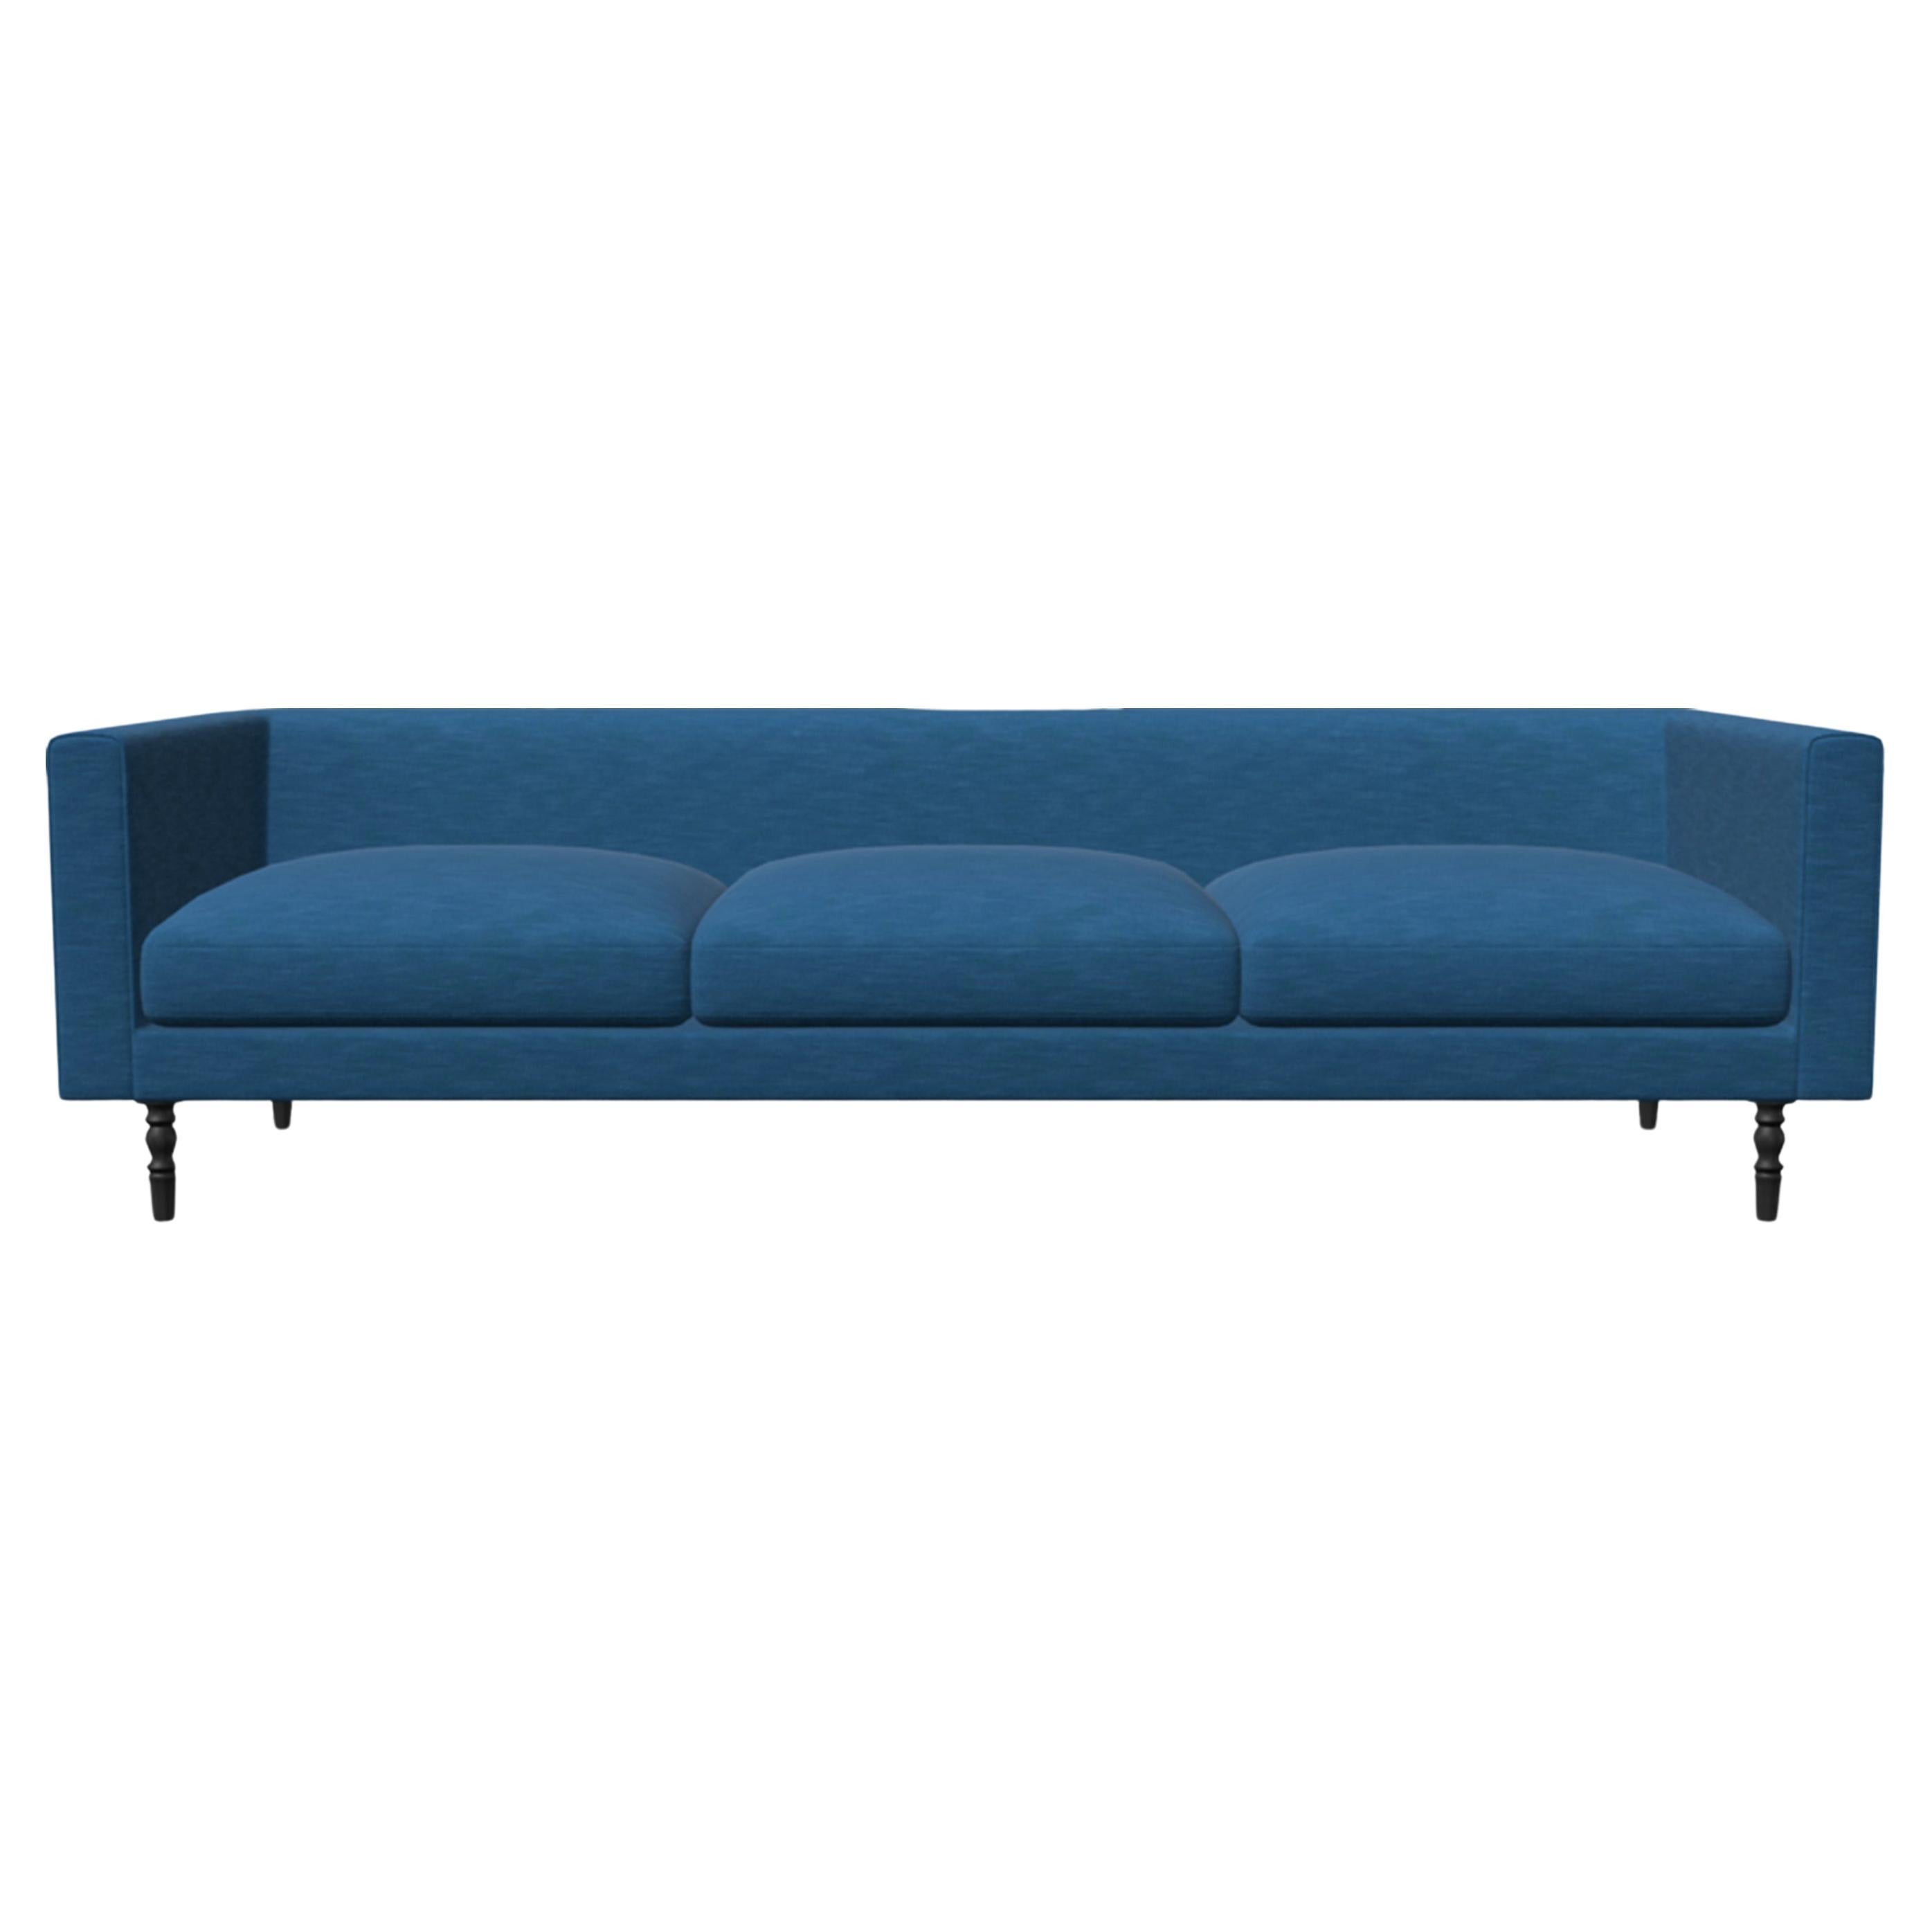 Moooi Boutique 3-Seat Sofa in Hallingdal 65, 723 Upholstery with Pawn Legs